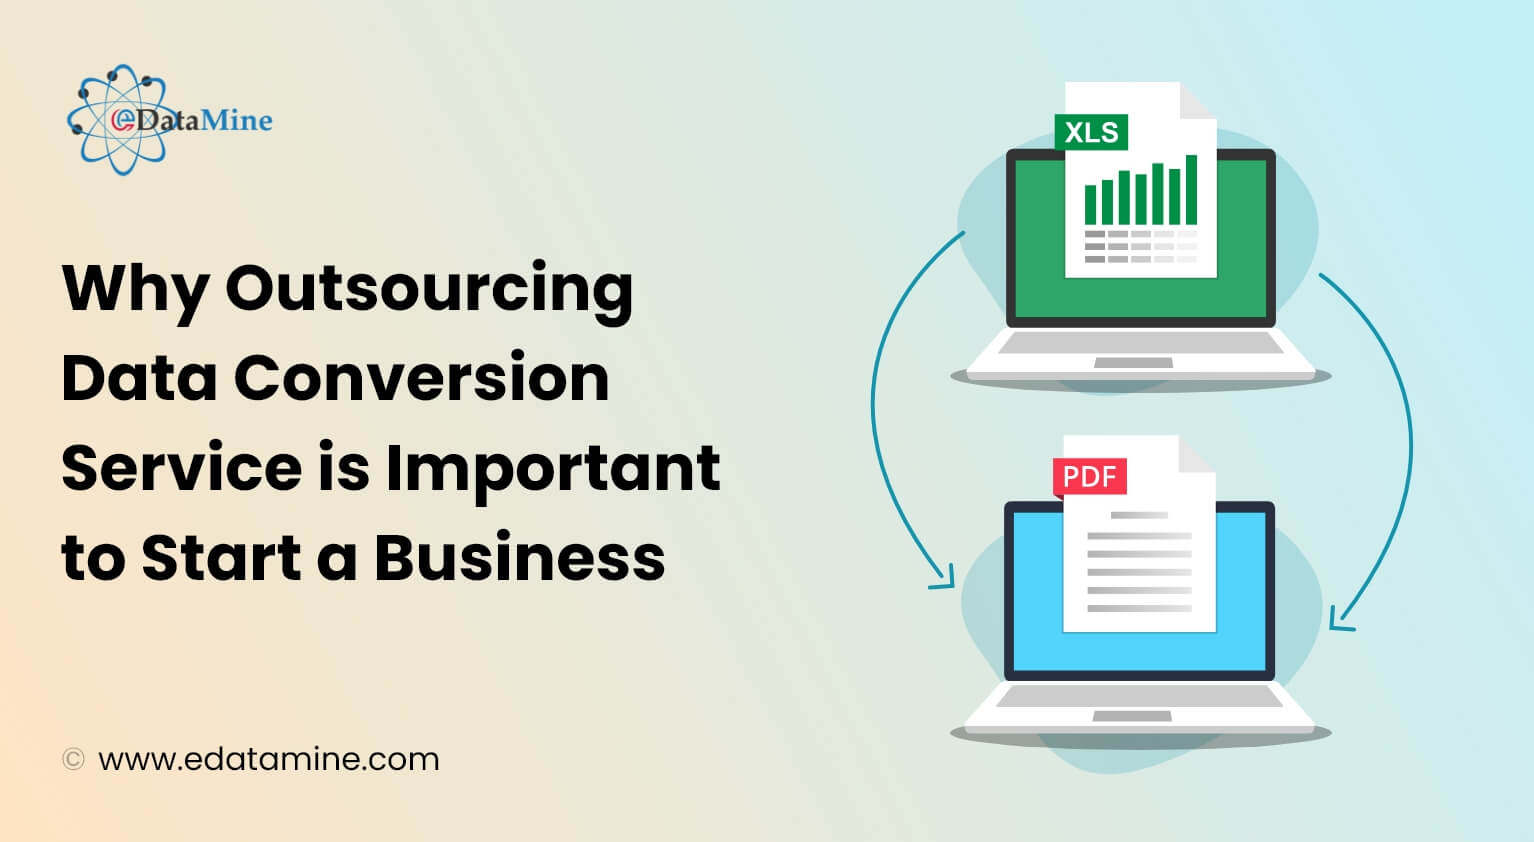 Why Outsourcing Data Conversion Service is Important to Start a Business